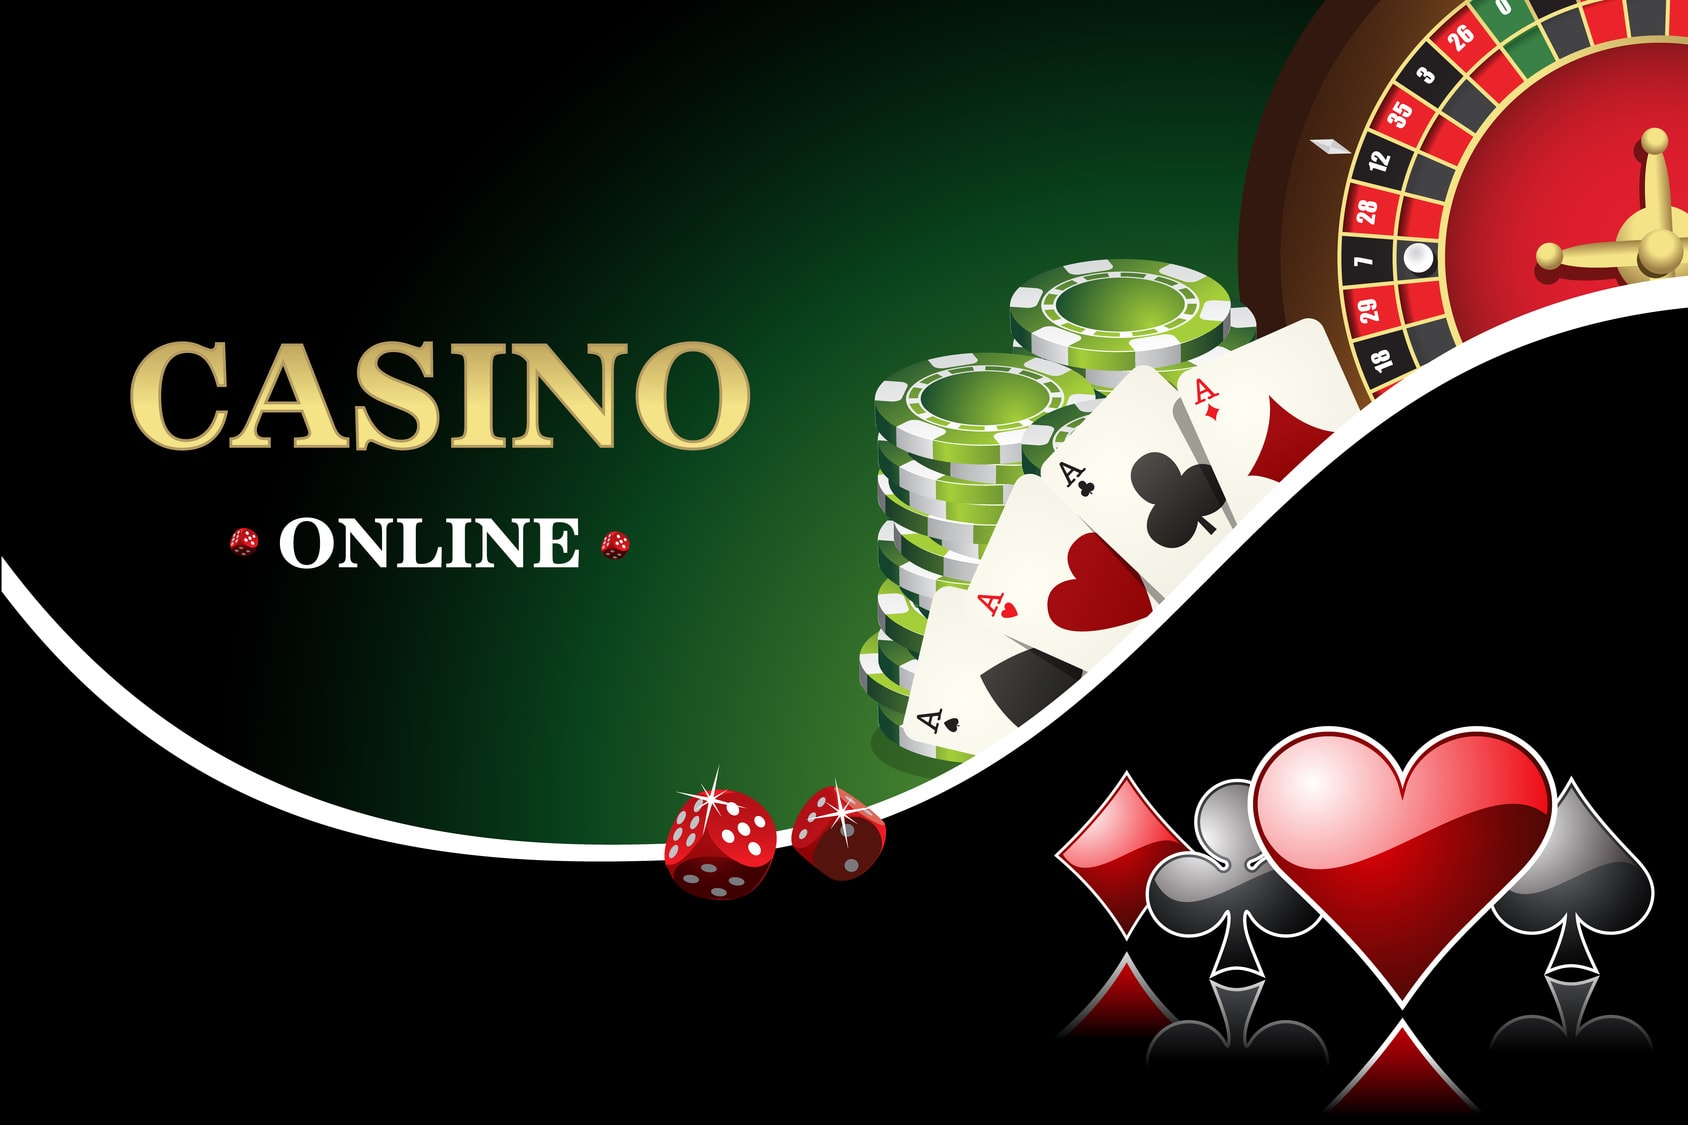 High qualitative collection of casino games by RTG